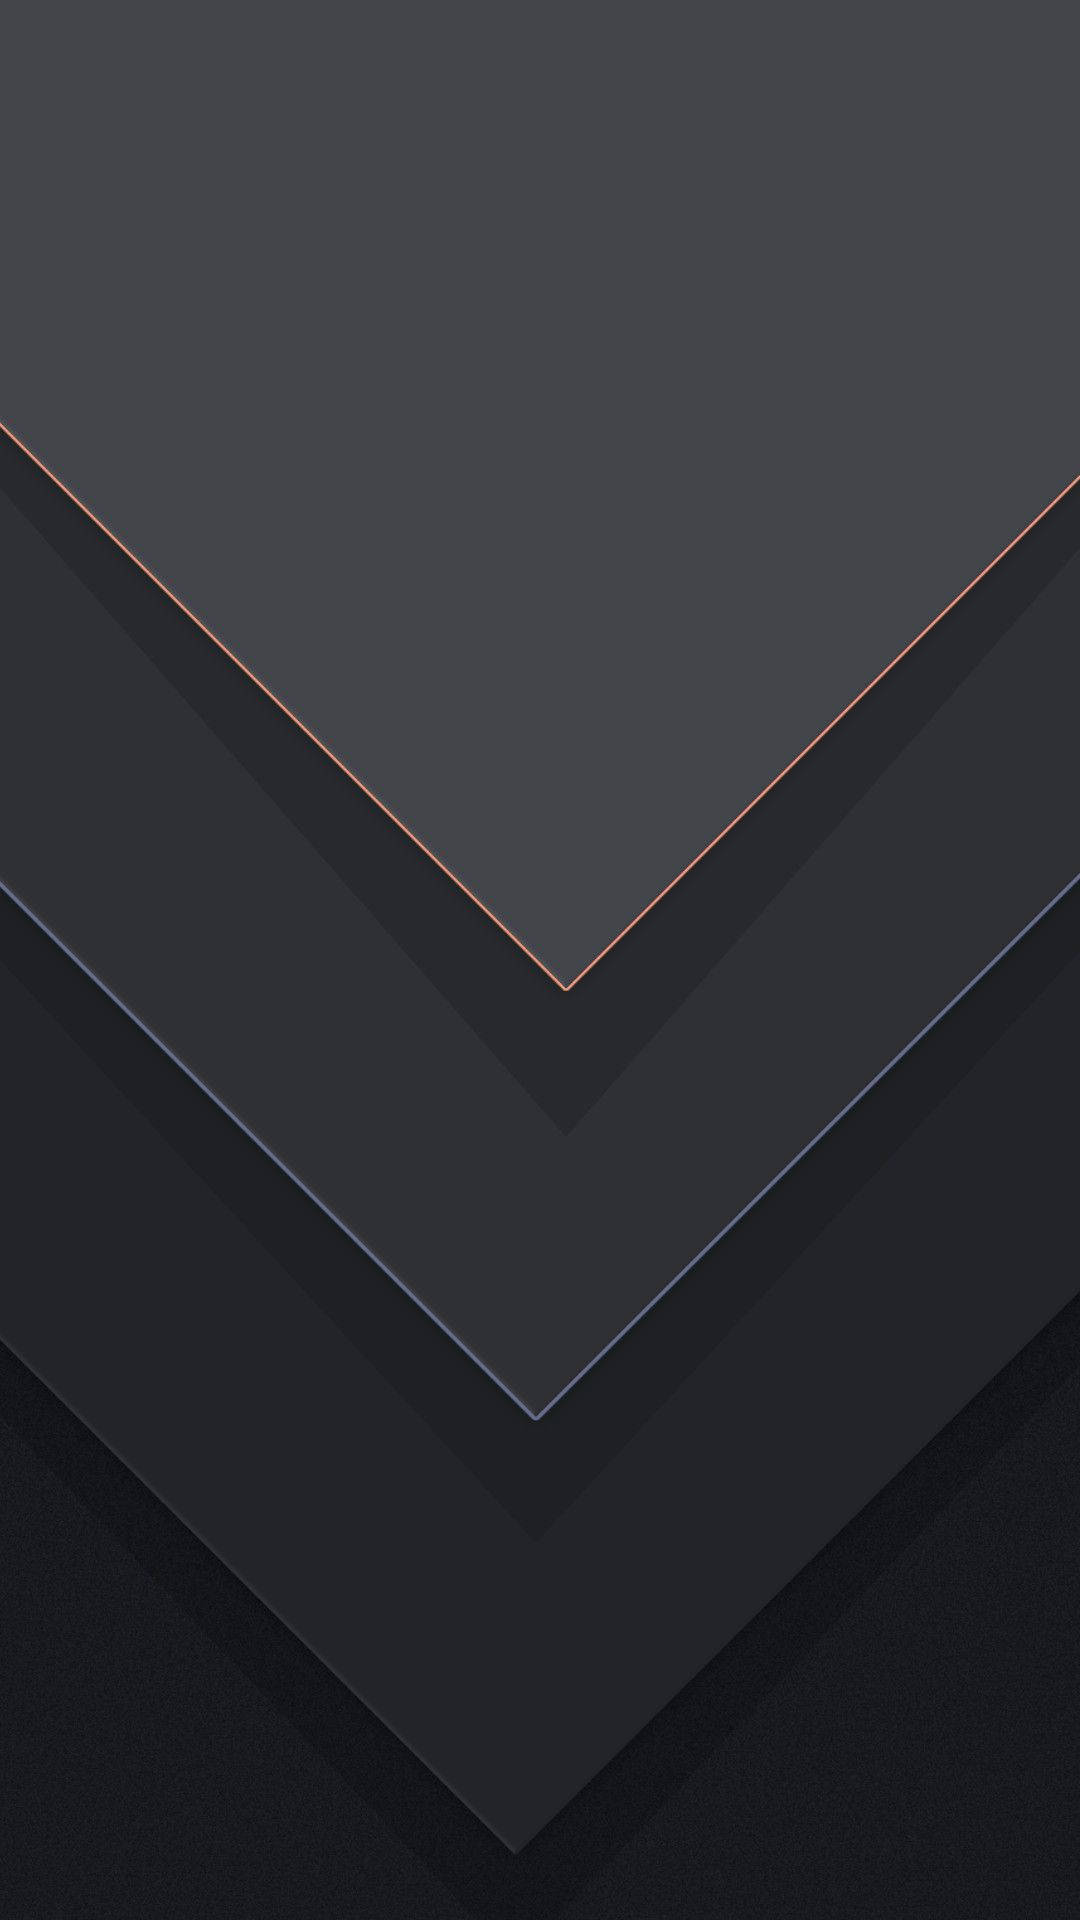 Black Android Inverted Triangles Background